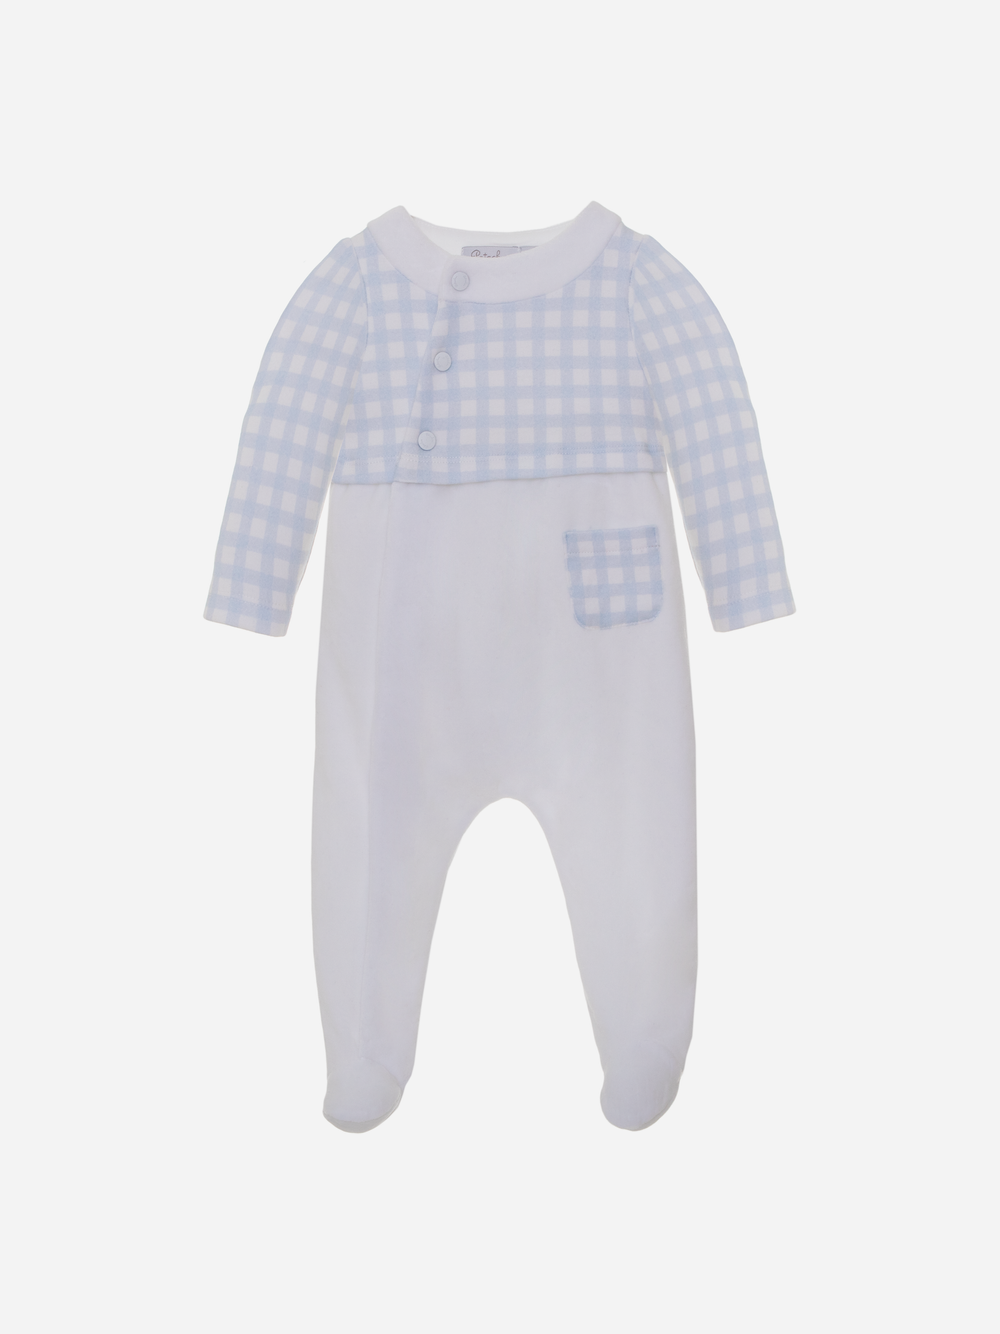 Blue Vichy and White Knit Babygrow 